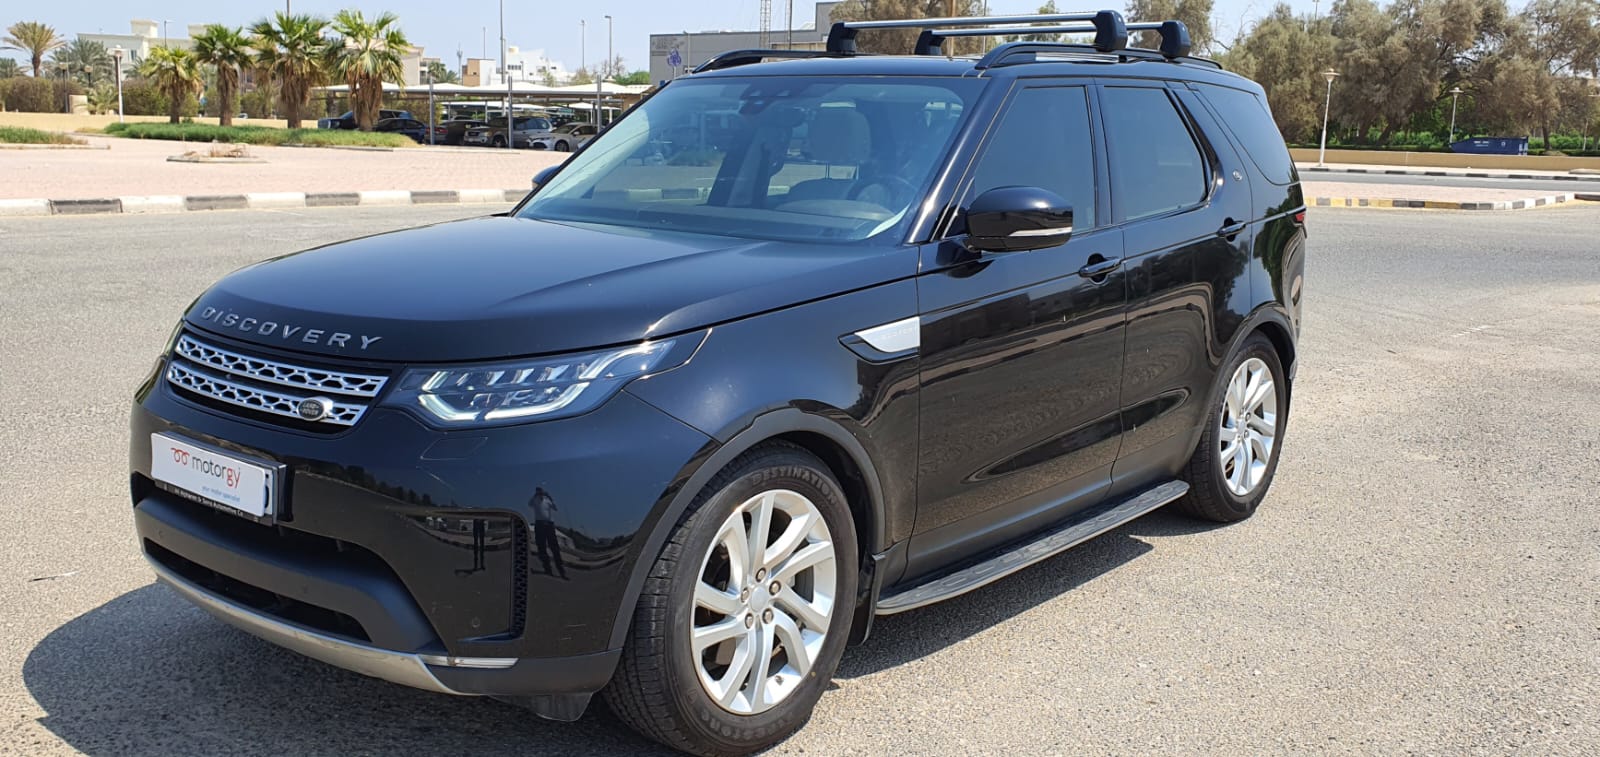 Land Rover؜ Discovery؜ 2018